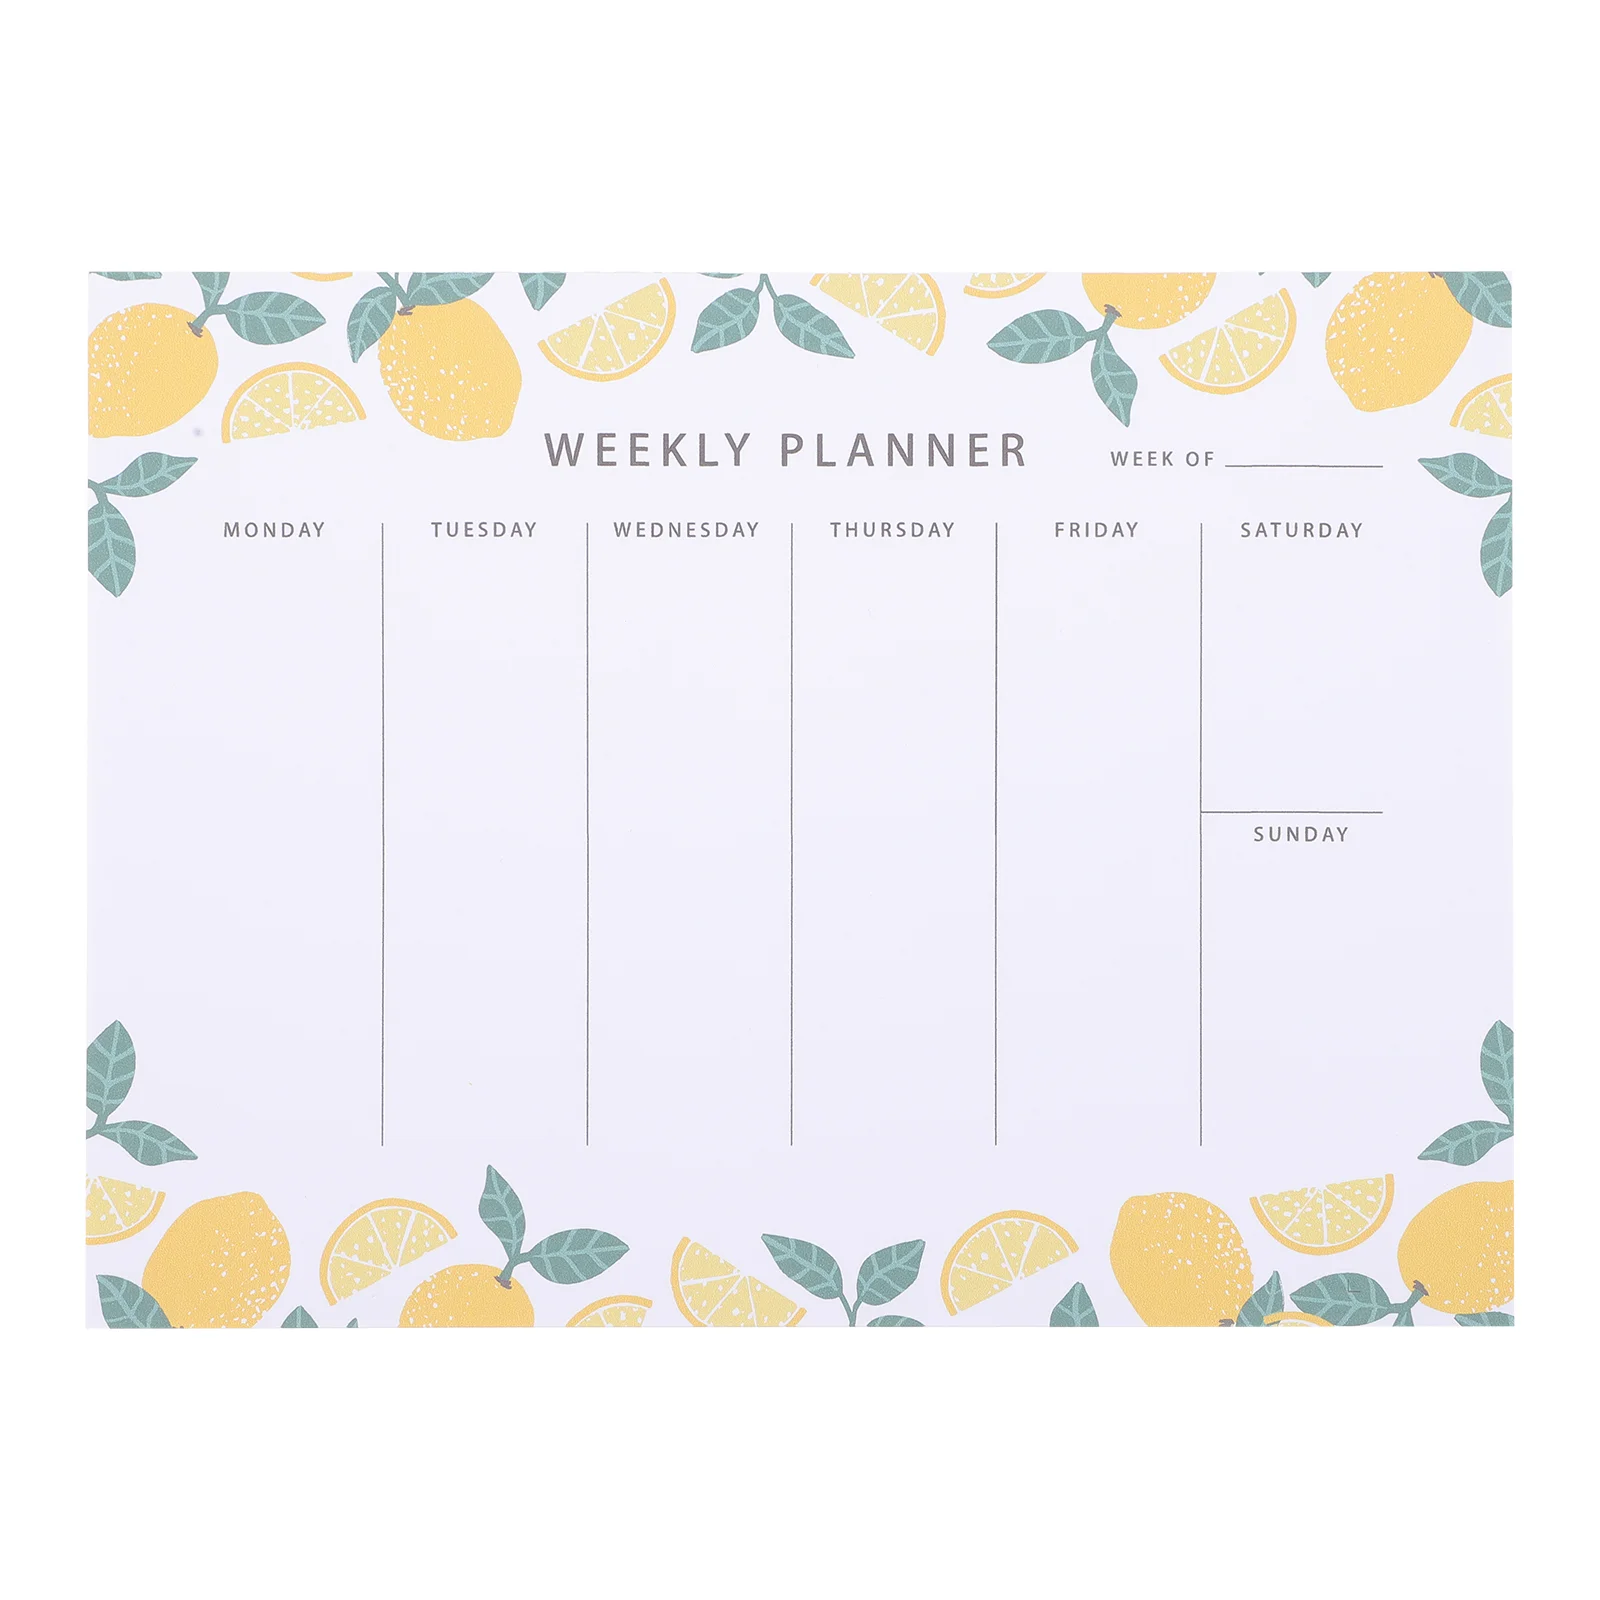 Weekly Planner Notepad for Daily Schedule To Do List Notes Habit Academic Planner Lemon